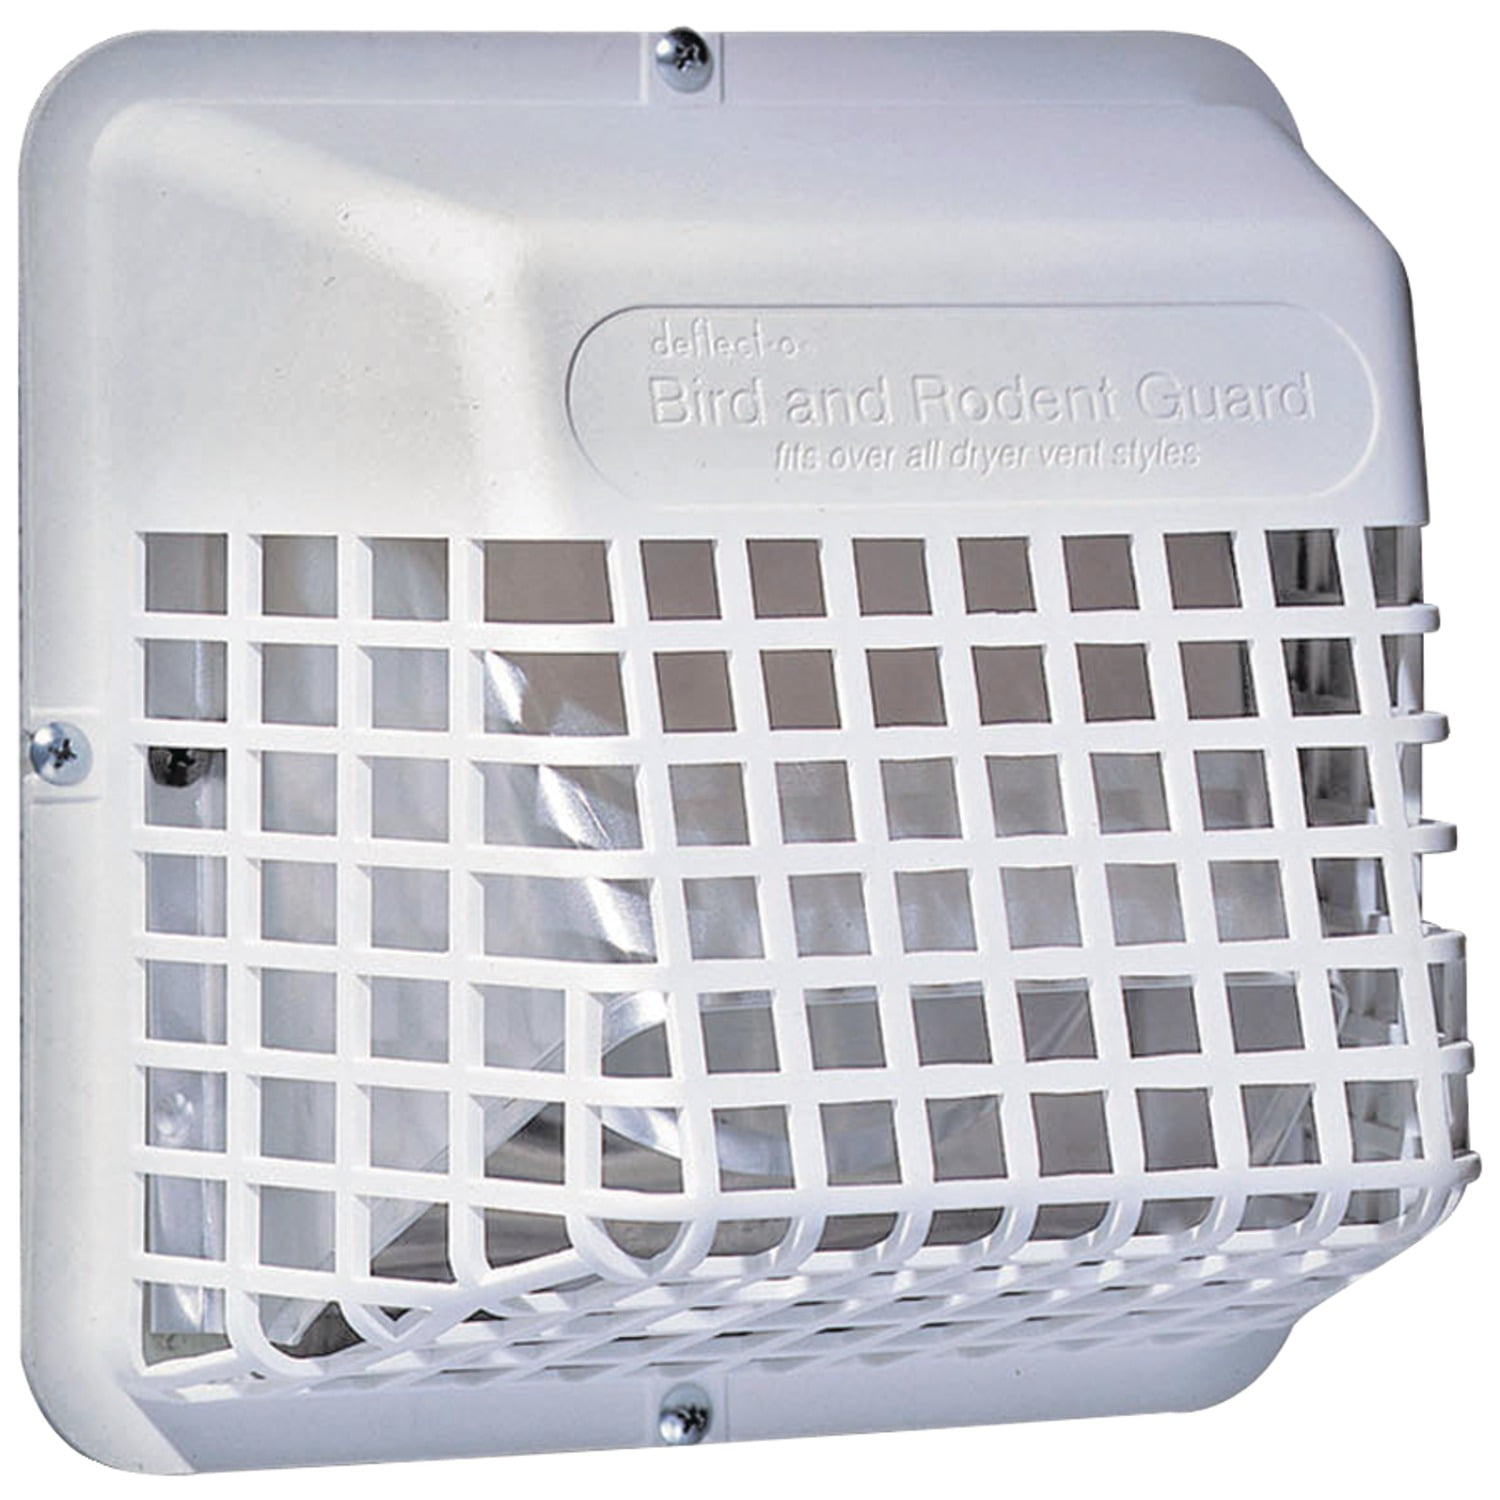 Details about   Louvered Dryer Hood with Bird Guard save elements Helps keep birds and pests 